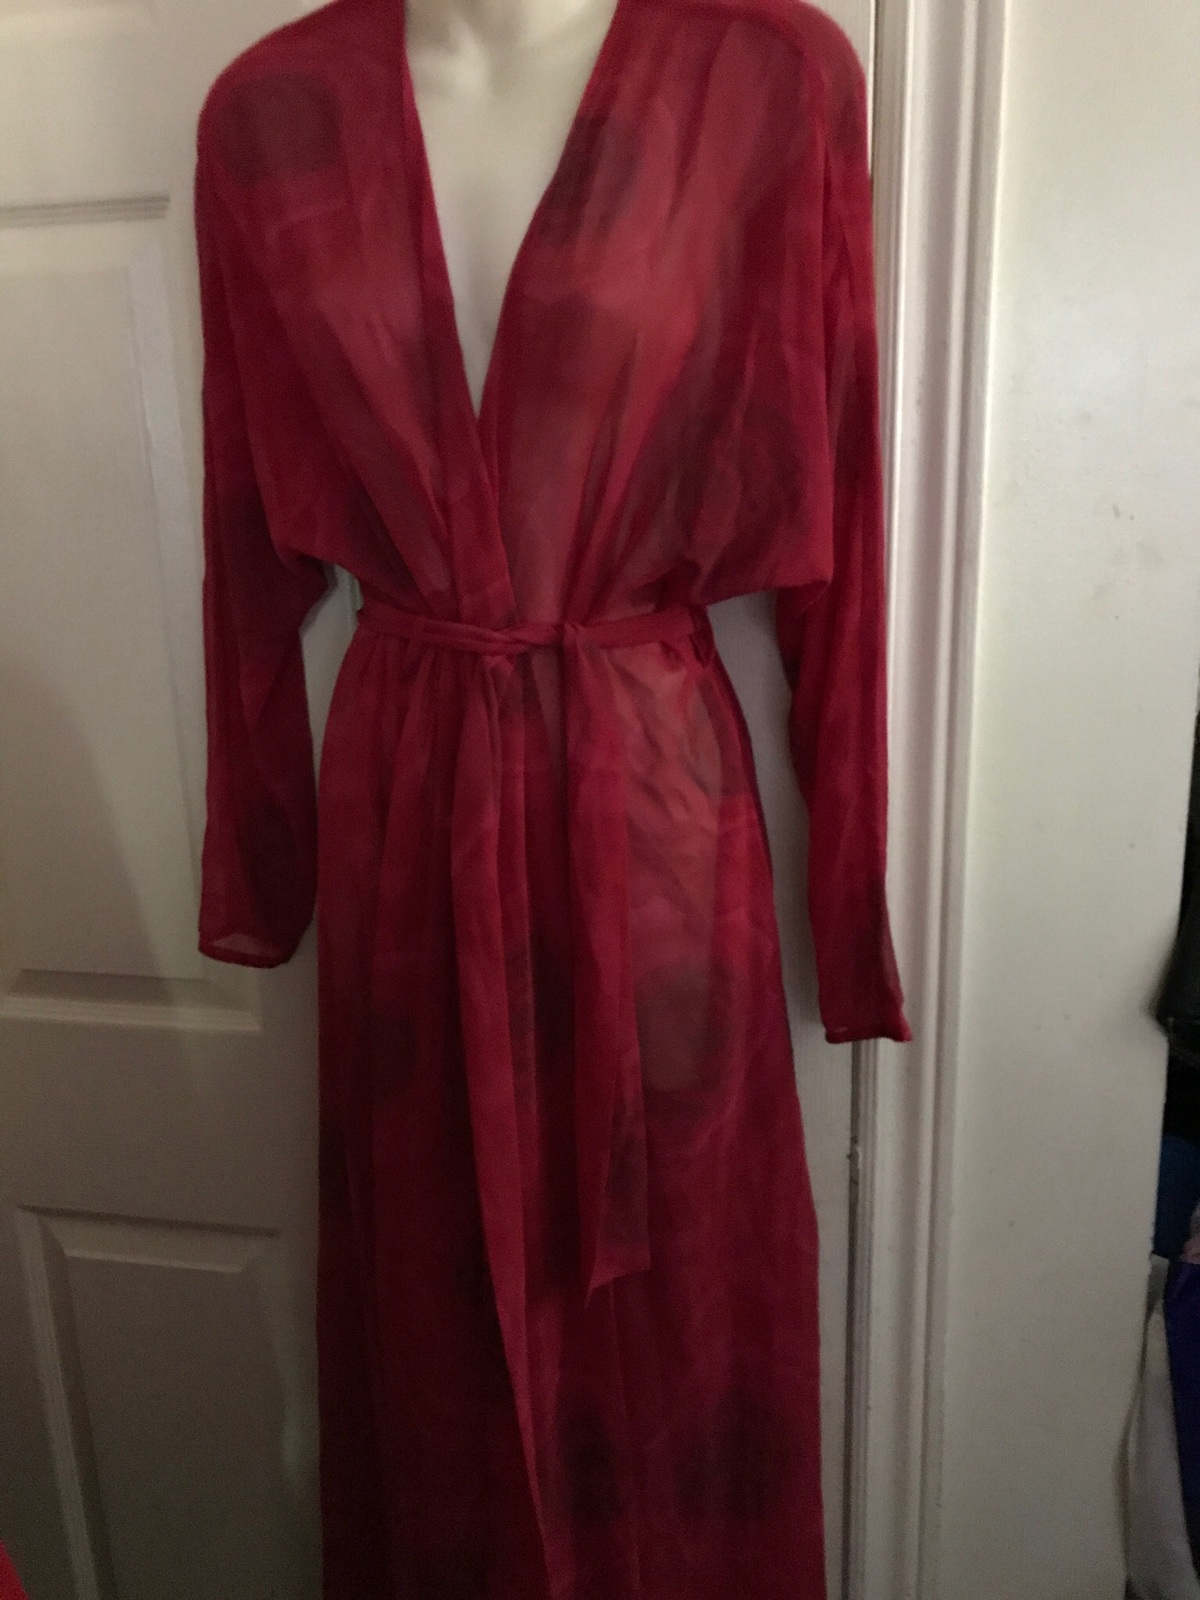 NWT Le Senza Red Robe Size S-M - Sleepwear & Robes